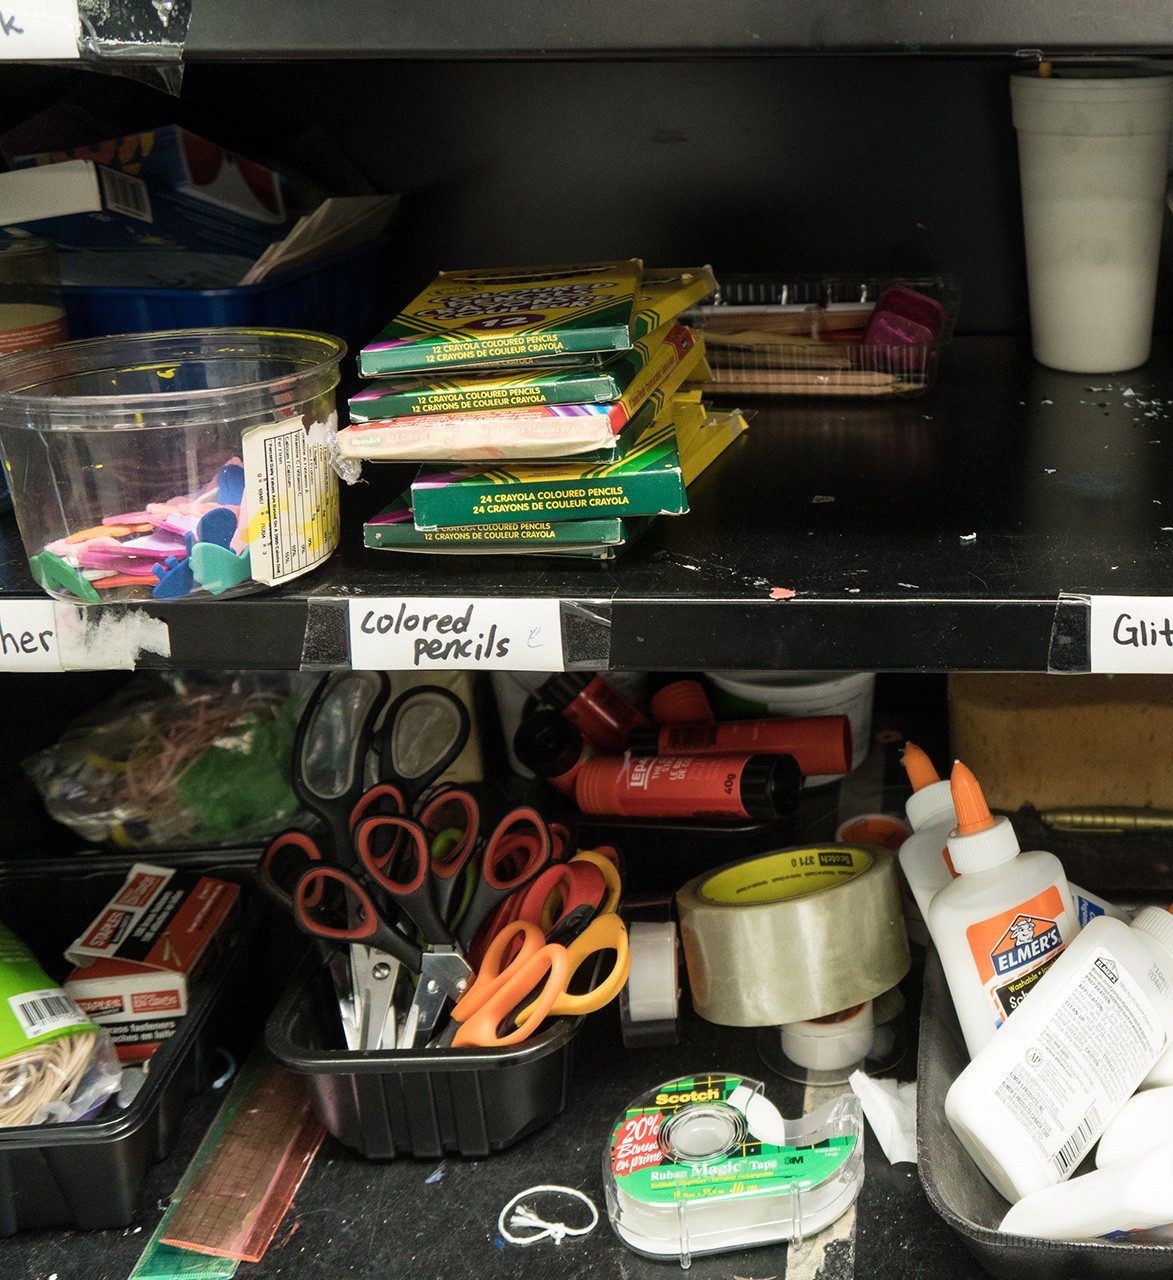 Art supplies on shelves inside a cupboard: container containing stickers, stack of boxes of coloured penciles, scissors, and glue sticks.